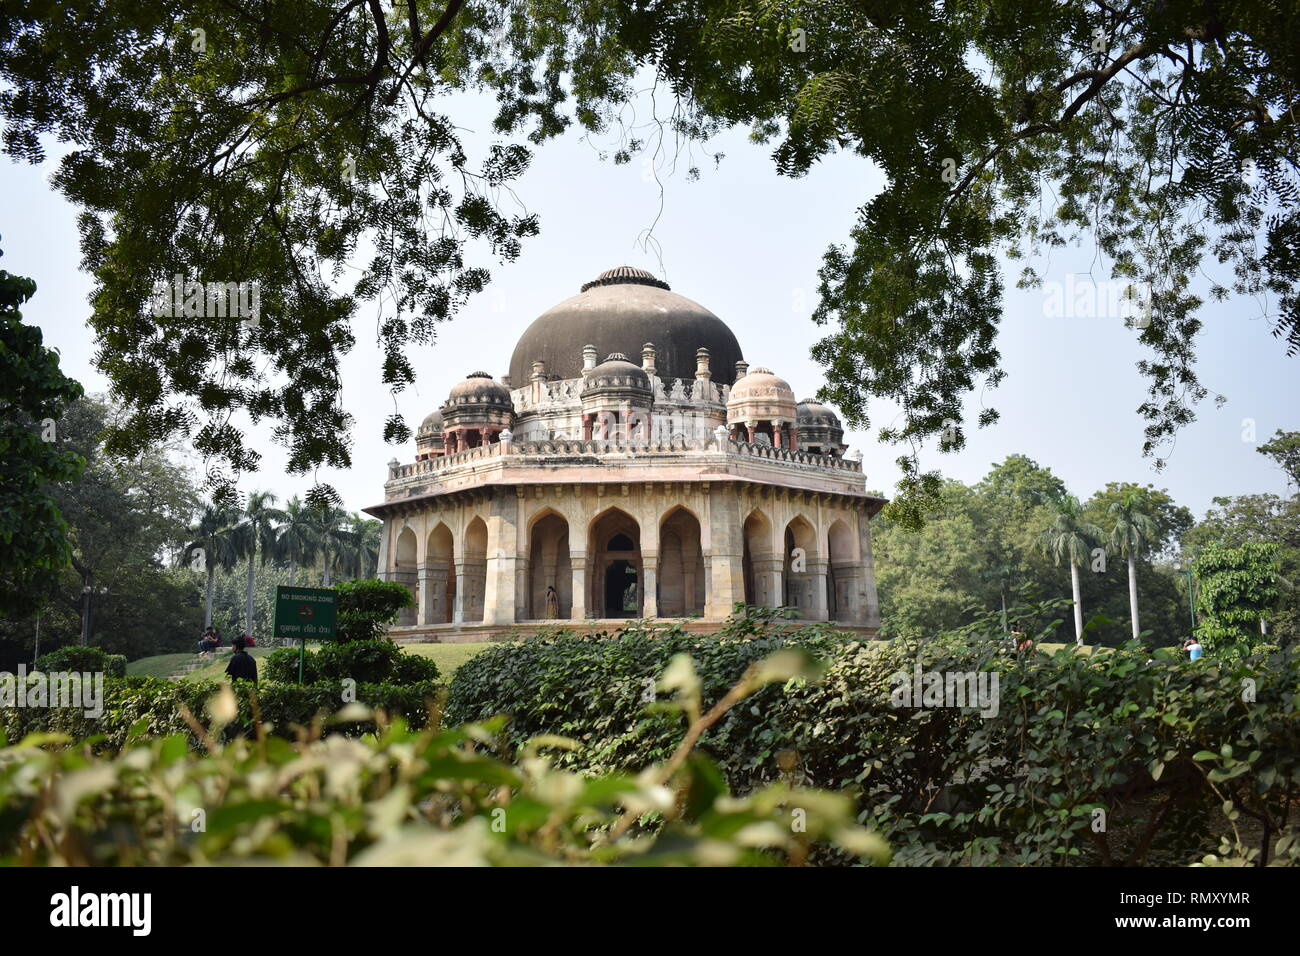 this is the beautiful scene of Lodhi gardens situated in Delhi the capital of India. it has the tomb of Sikandar Lodi.it is a magnificent monument. Stock Photo